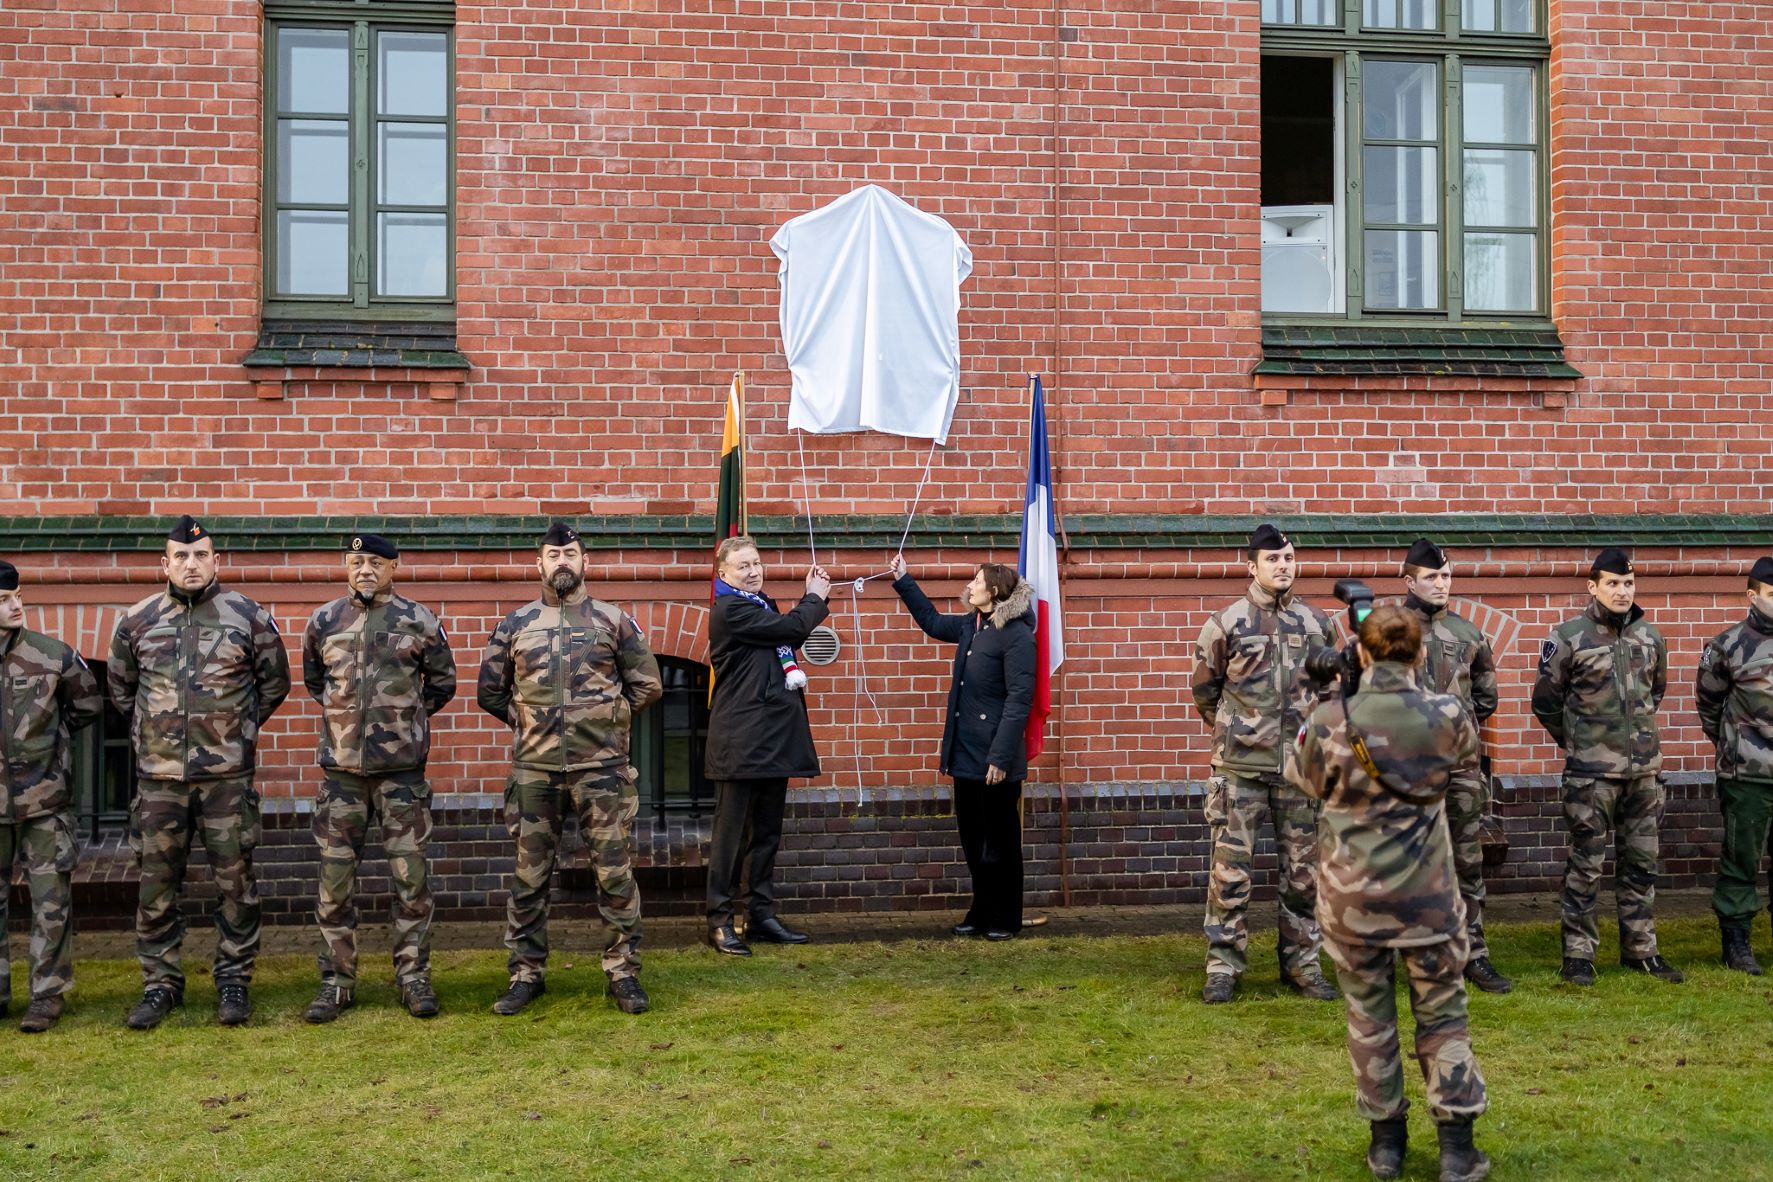 Historical ties between Klaipeda and France were renewed by the Alliance